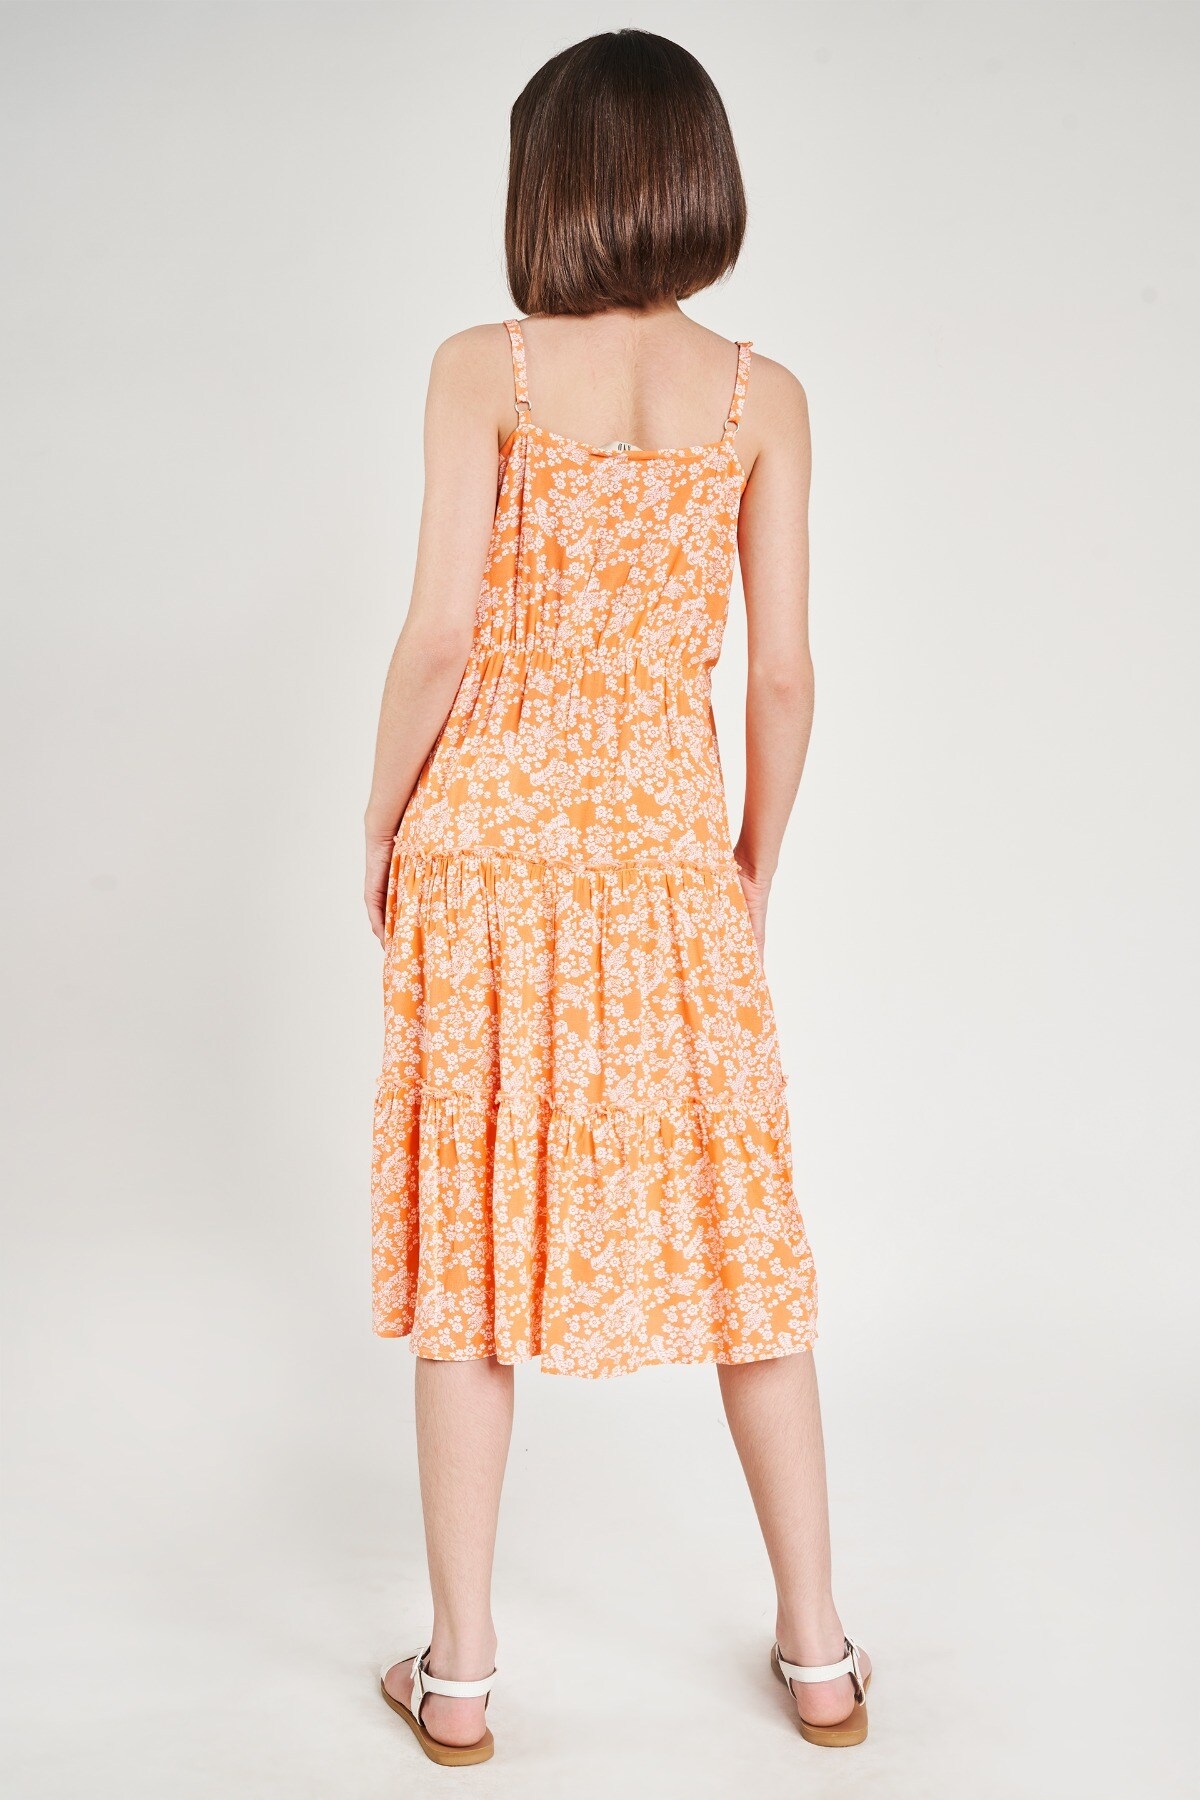 AND | Orange Floral Printed Fit And Flare Dress 4